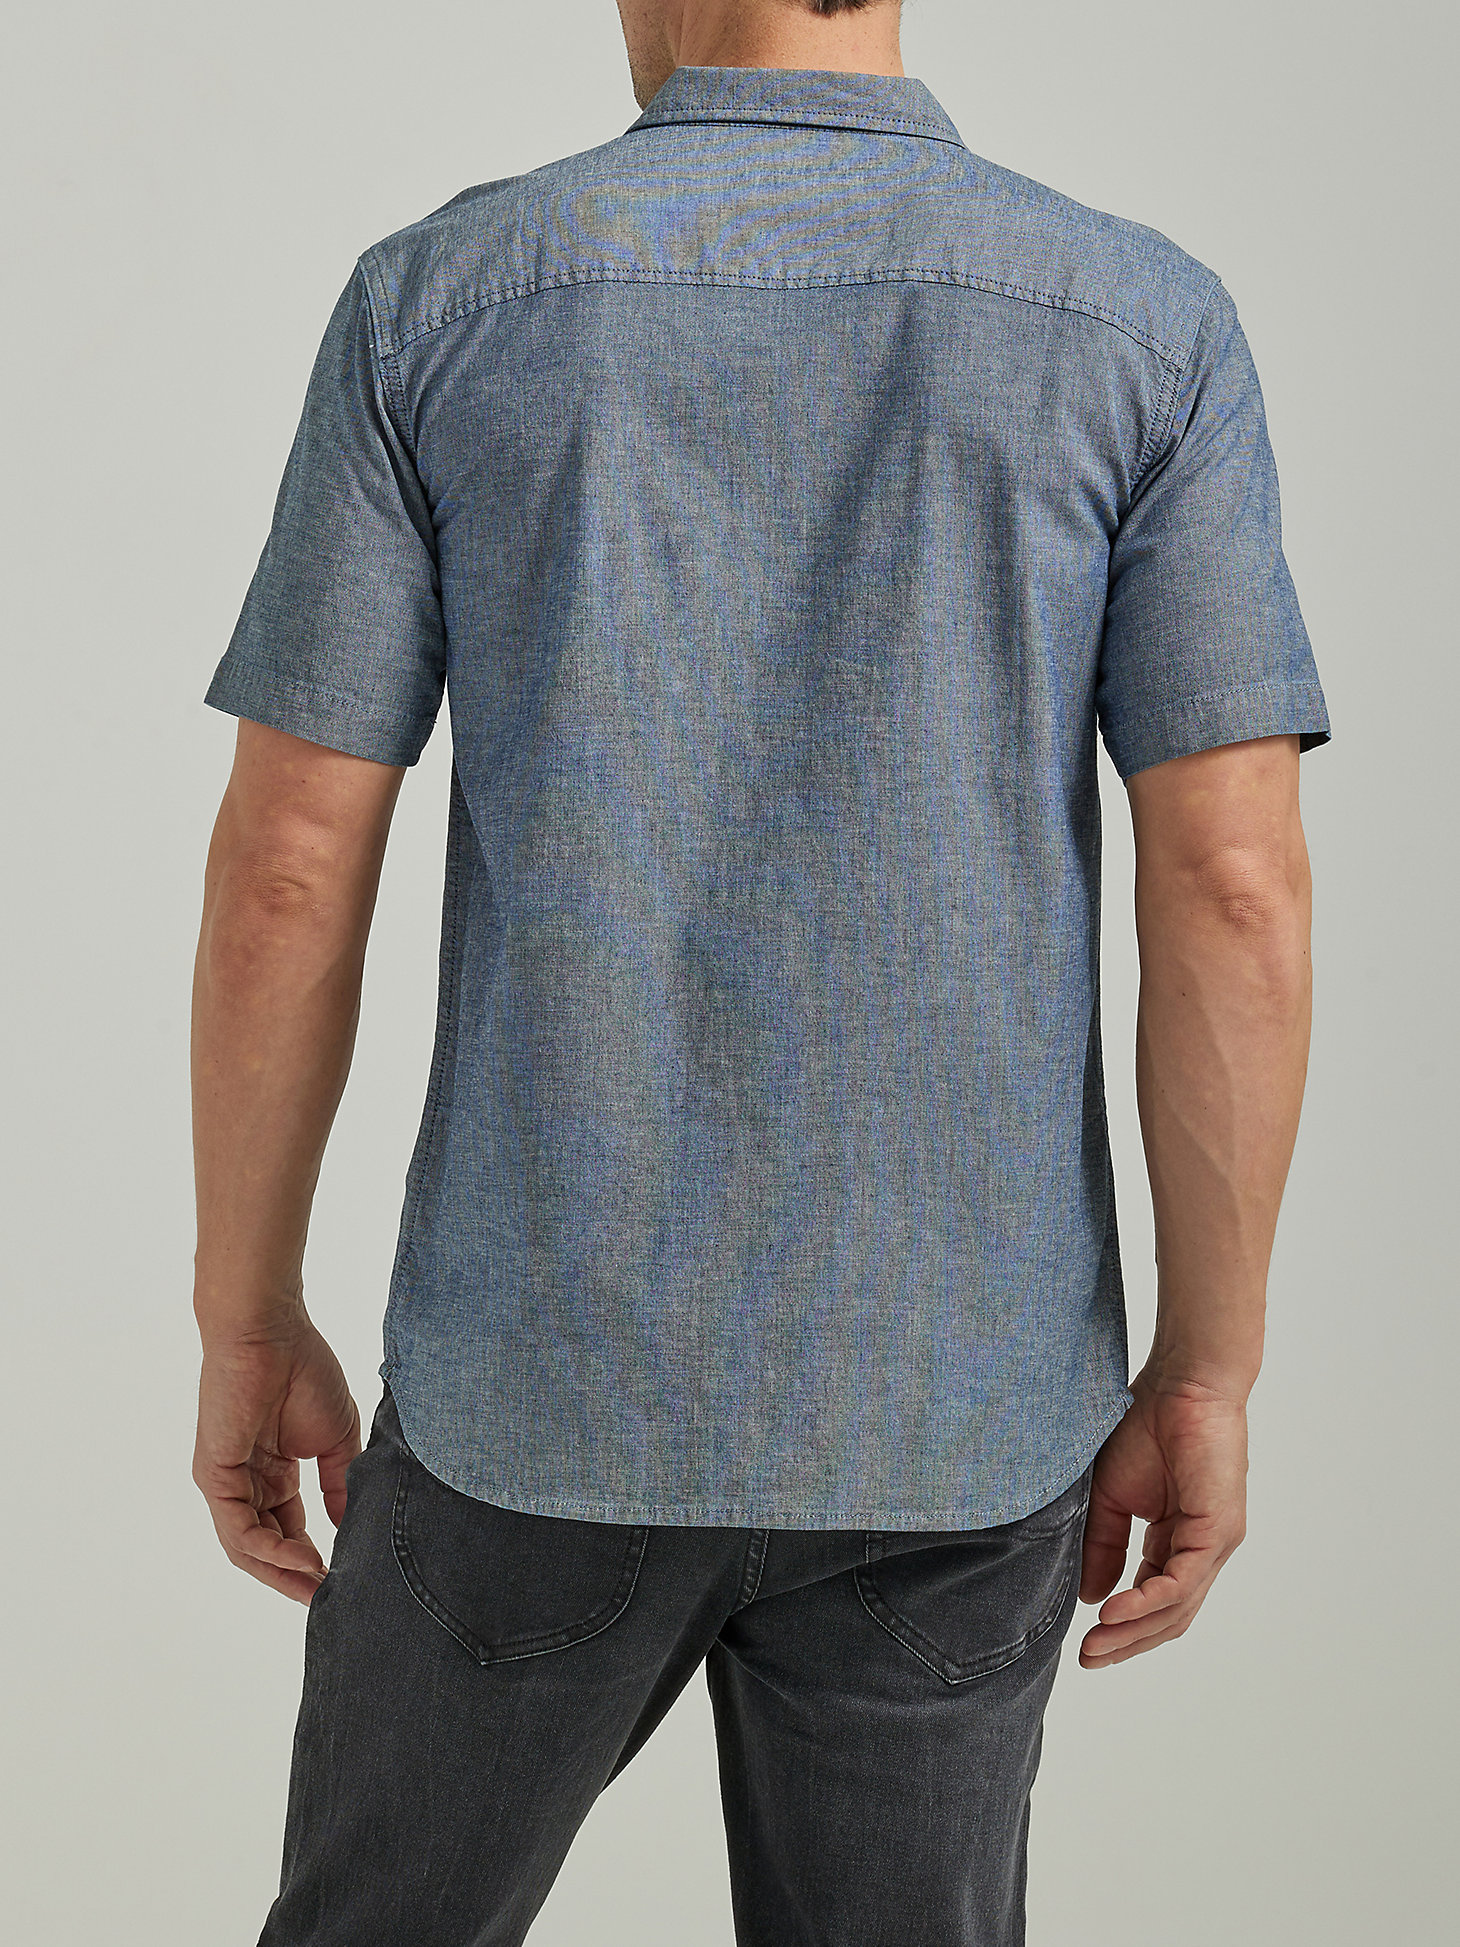 Men's Extreme Motion Short Sleeve Worker Shirt in Mid Wash Chambray alternative view 1